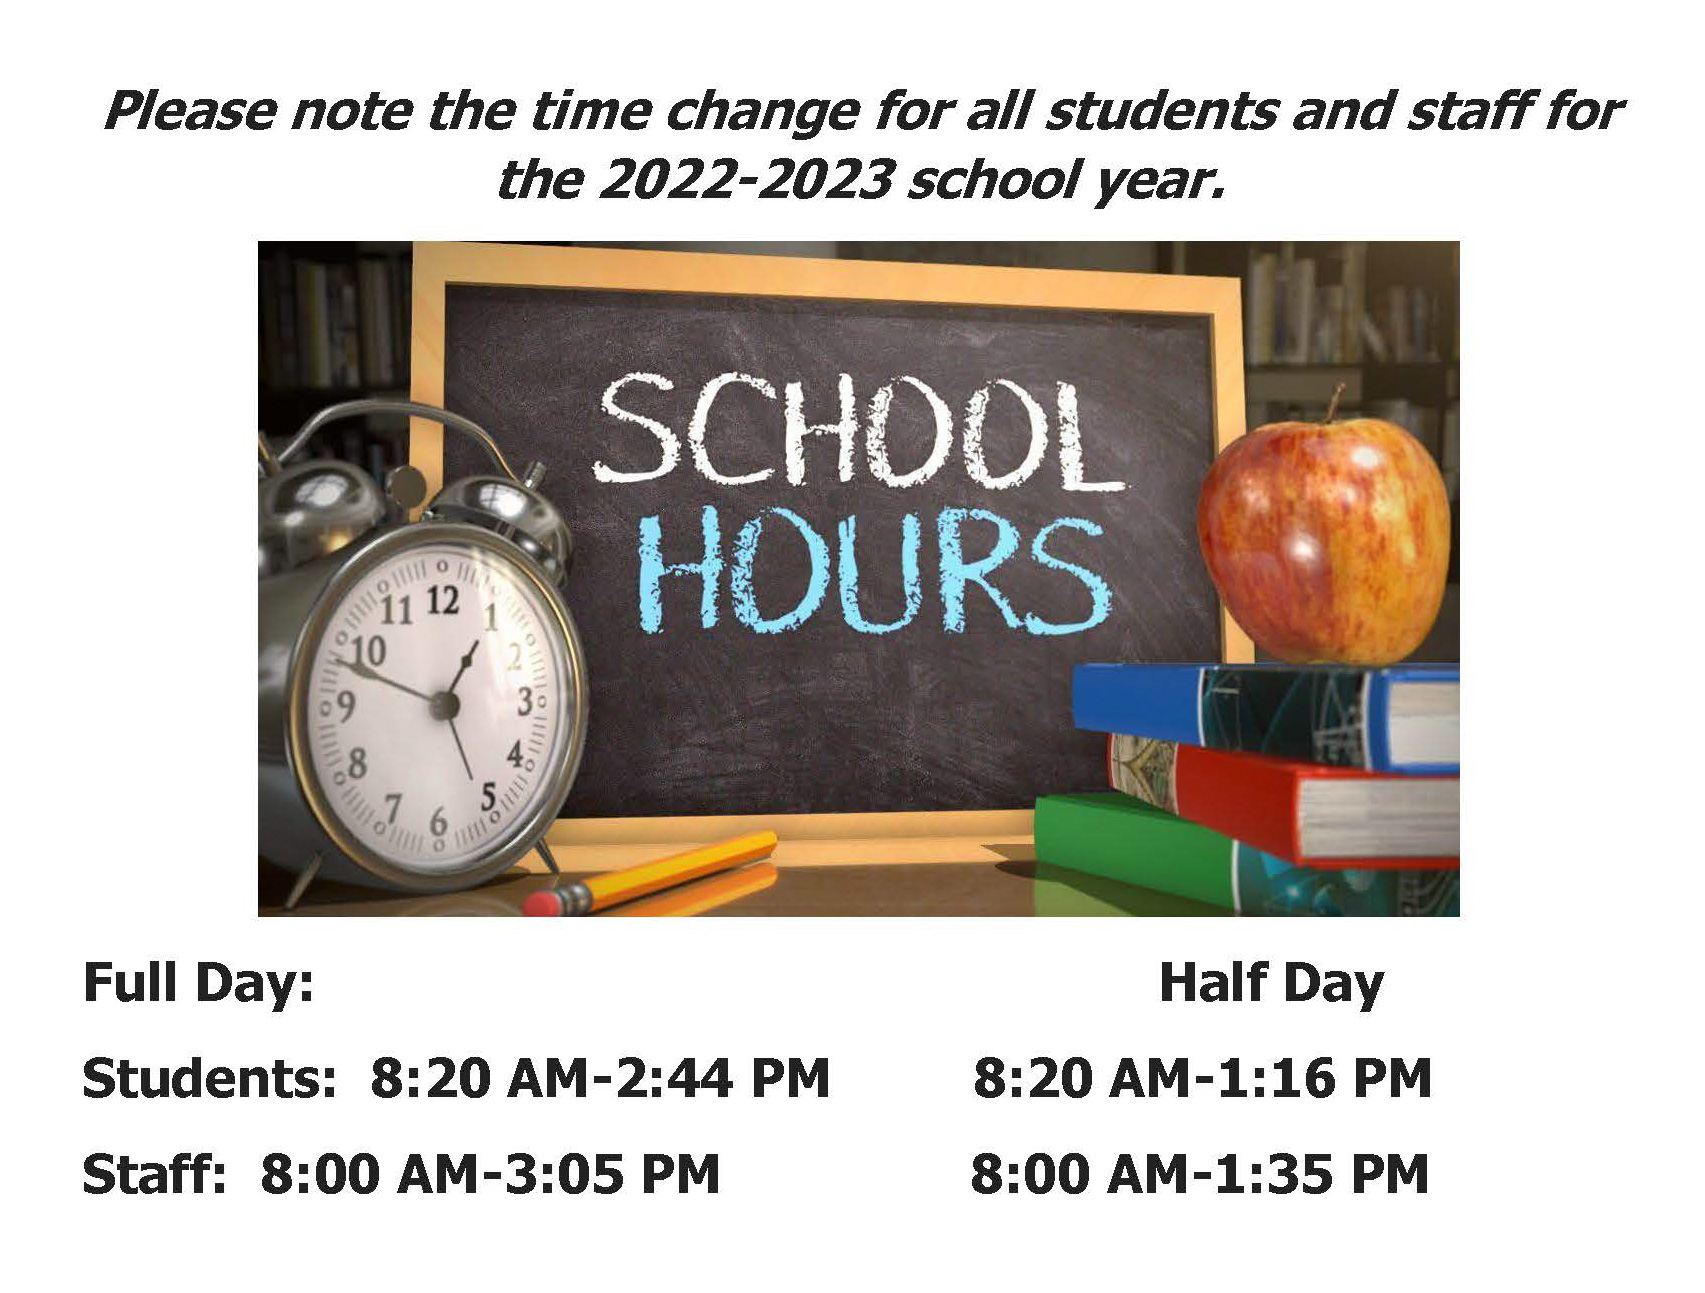 Please note the time change for all the students and staff for the 2022-2023 school year. Full day: Students: 8:20  AM - 2:44 PM  Half Day: 8:20 AM - 1:16 PM Staff: 8:00 AM - 3:05 PM  - Half Day 8:00 AM - 1:35 PM